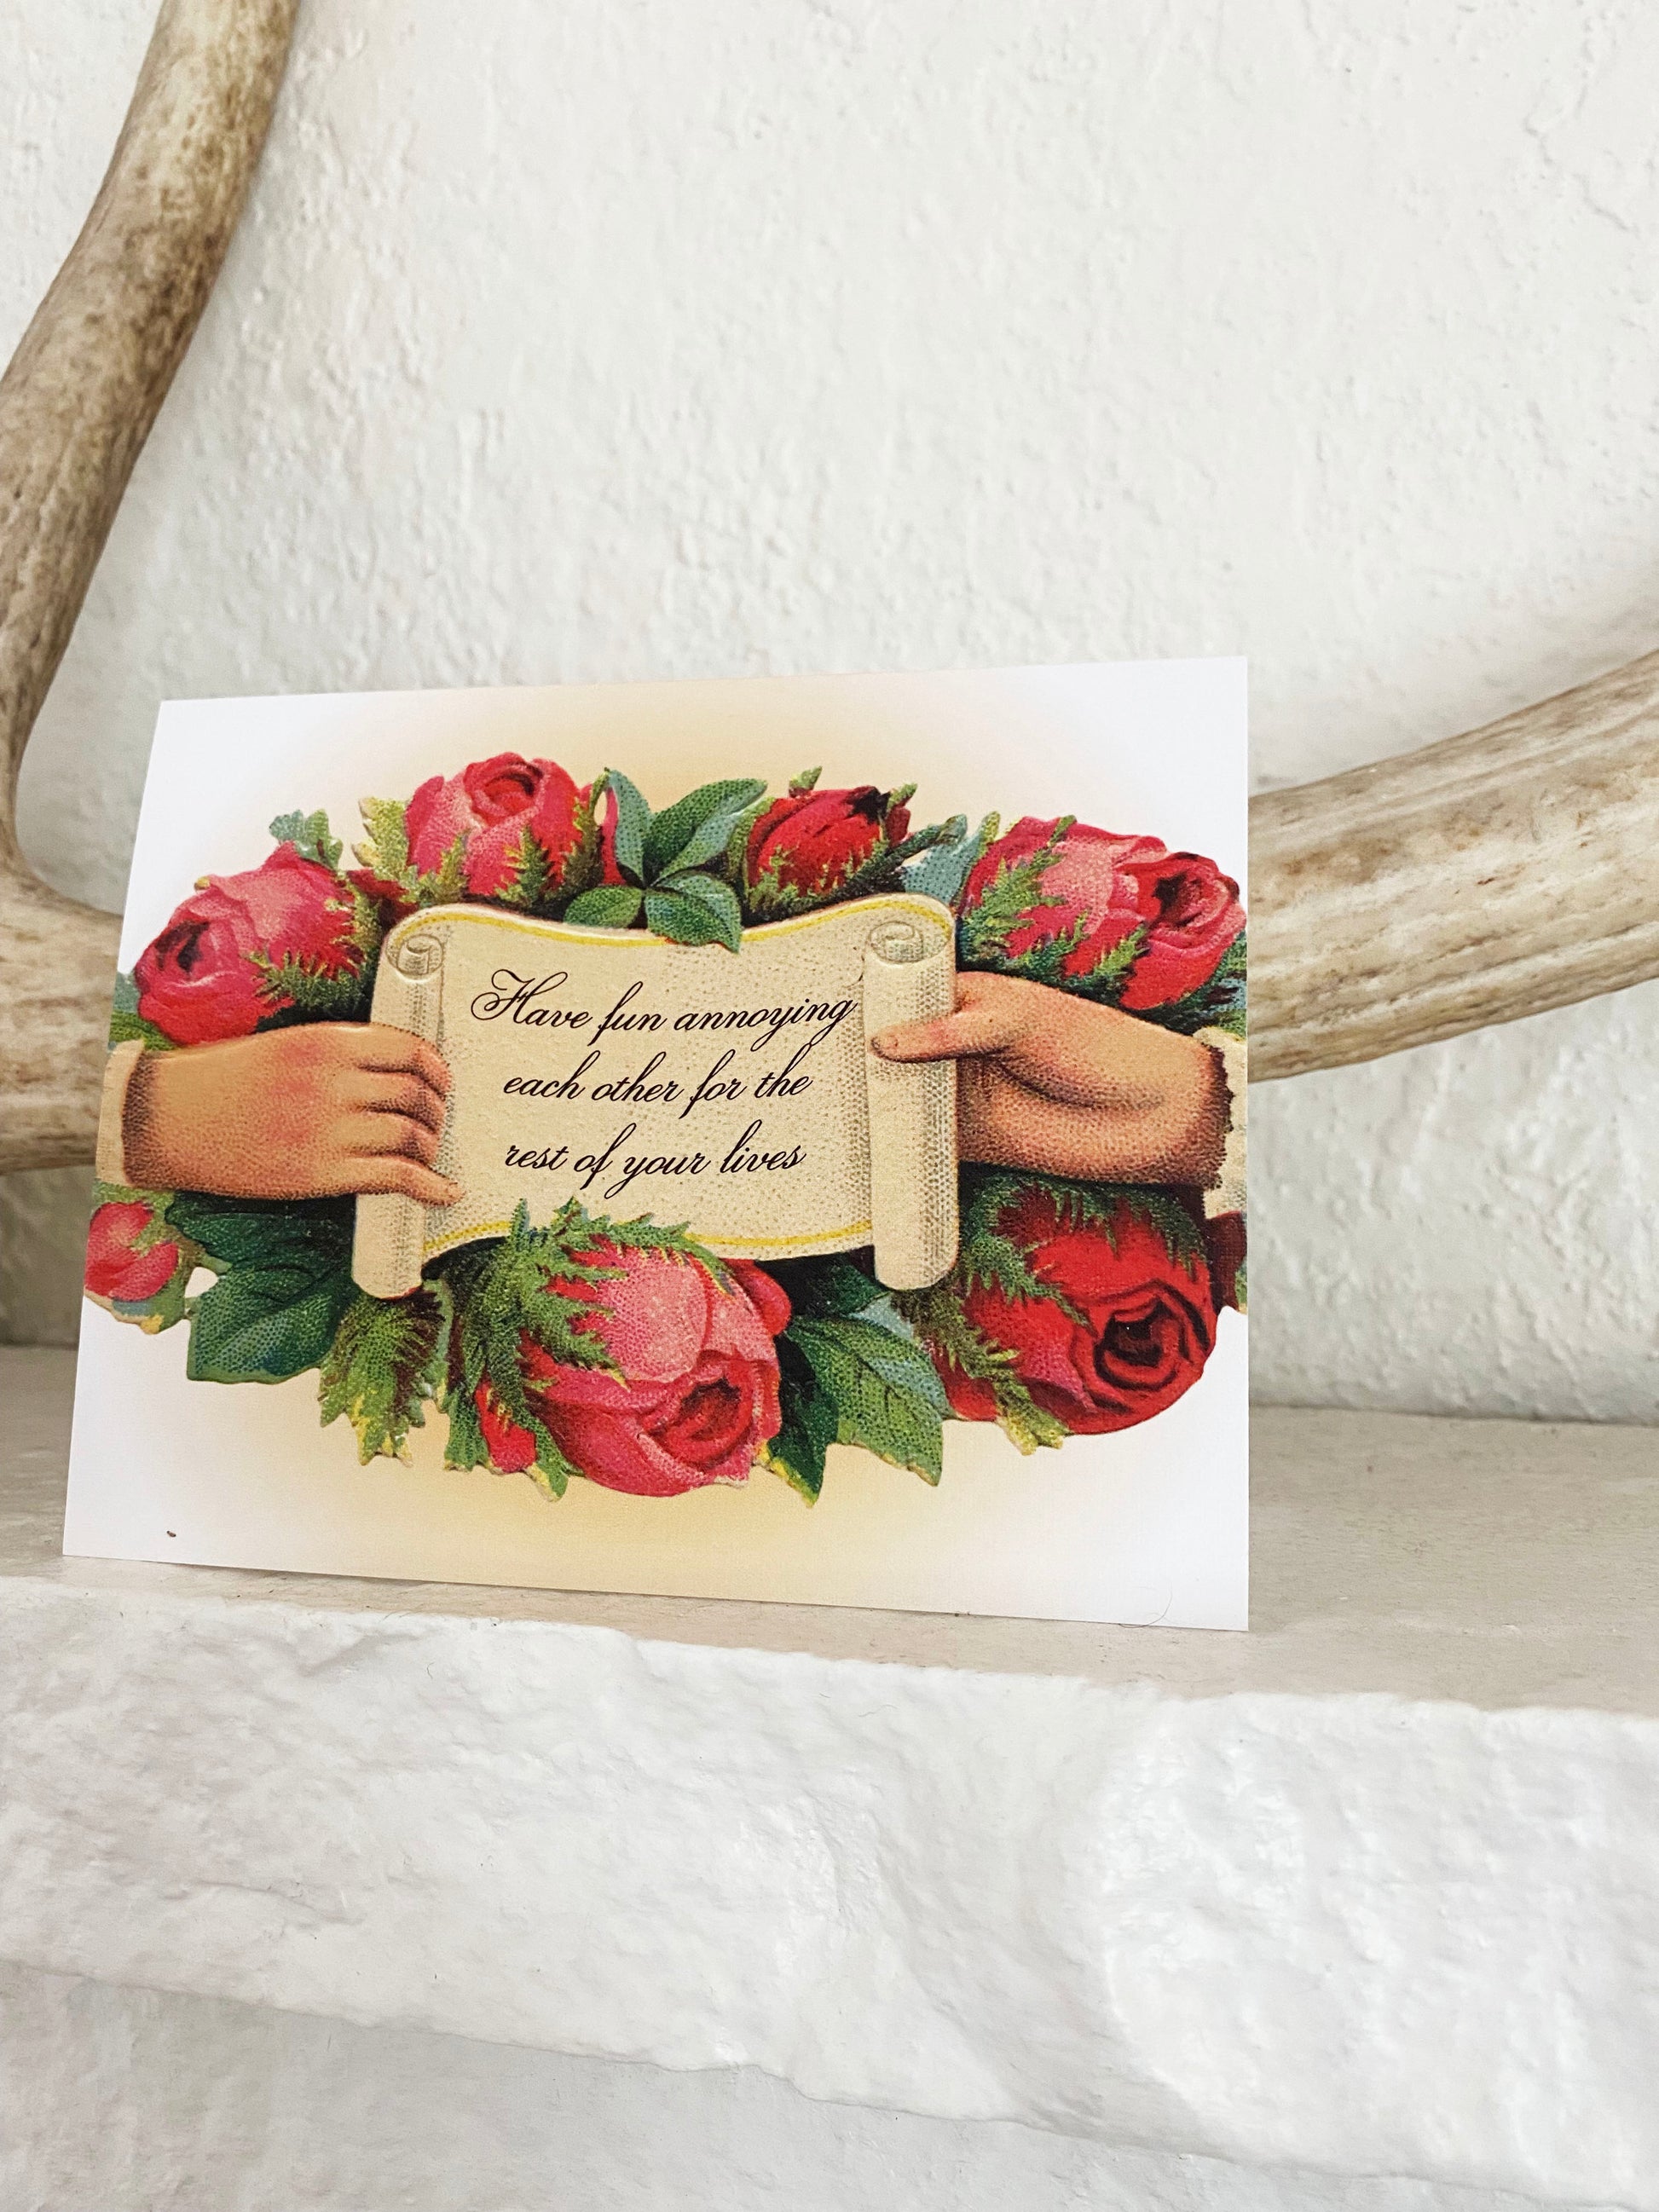 victorian sweet valentine card cute pretty flowers bouquet with pretty words funny have fun annoying each other